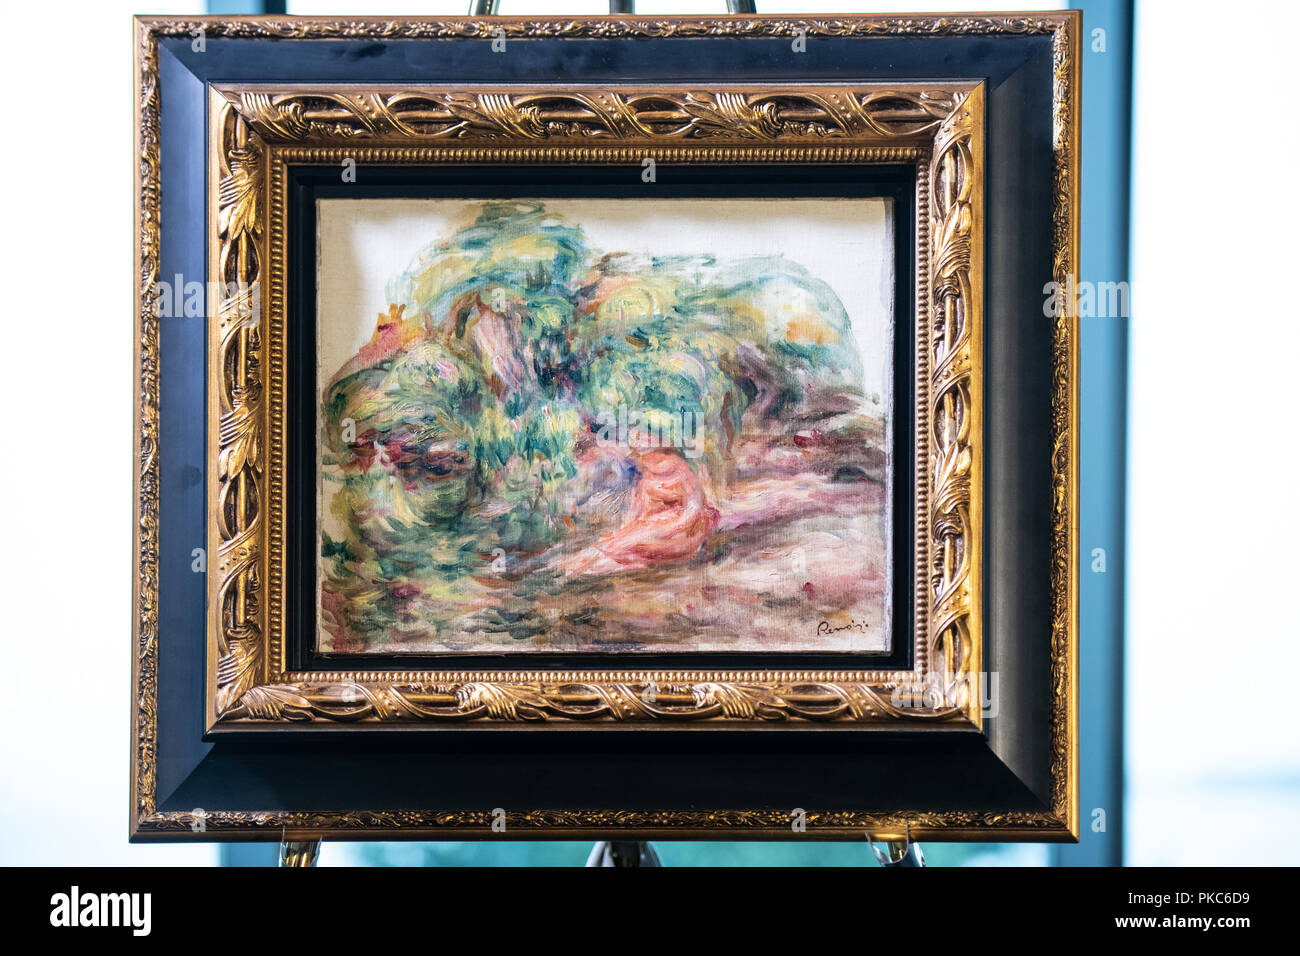 New York, USA,  12 September 2018. The painting 'Deux Femmes Dans Un Jardin' by French impressionist Pierre-Auguste Renoir is exhibited during a ceremony to return the painting, stolen by the Nazis in World War II from the Sulitzer's family in Paris, at the Jewish Heritage Museum in New York City.  Credit: Enrique Shore Credit: Enrique Shore/Alamy Live News Stock Photo